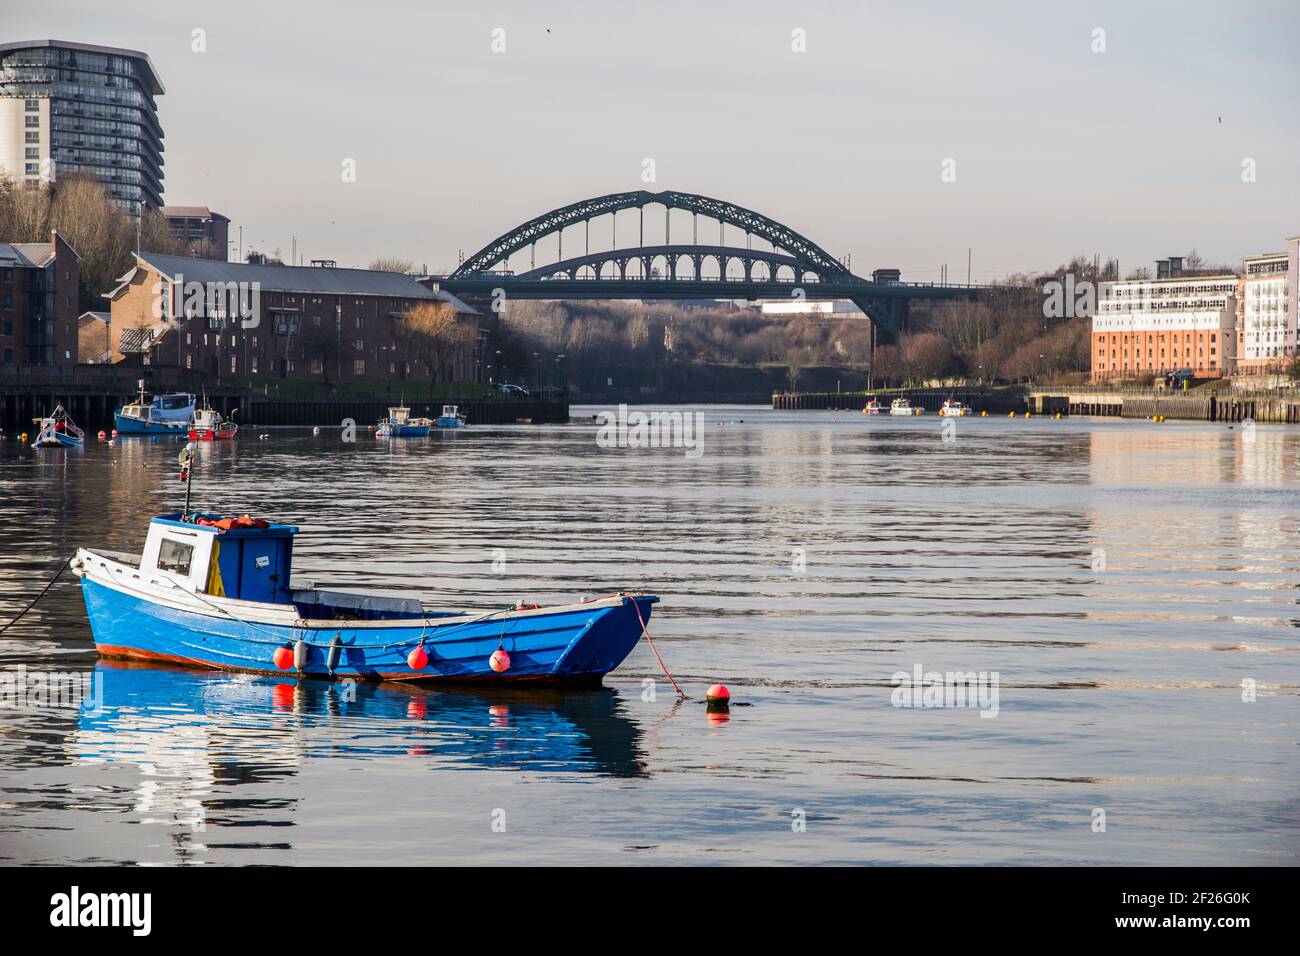 View of Sunderland’s sea fishing harbour with boatd reflecting in the still water and the iconic Wearmouth Bridge in the background Stock Photo